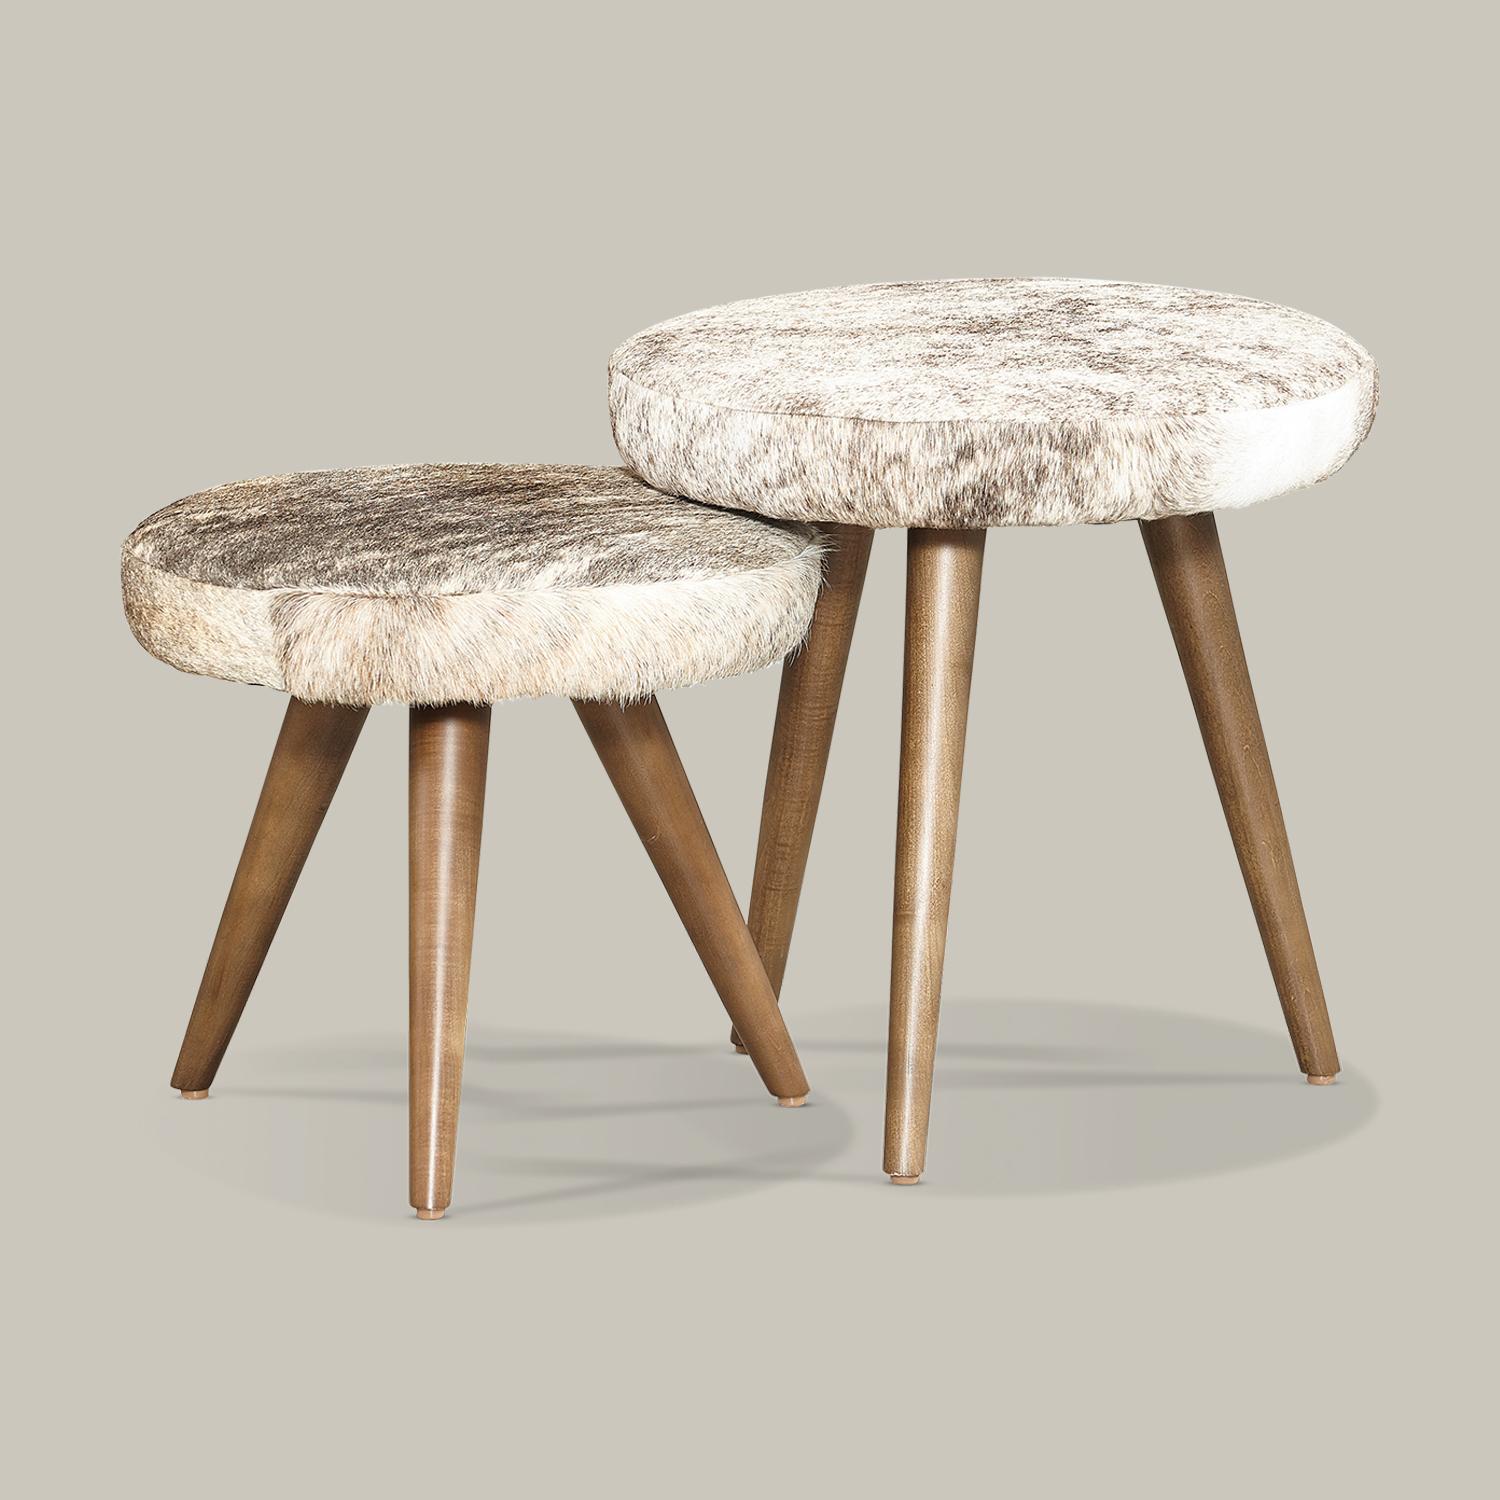 Upholstered stool in natural hair-on-hide leather with 3 tapered legs in solid hardwood forms a unique, functional accent reminiscent of global design traditions. Each piece is one-of-a-kind due to subtle, natural variations in the premium hair on